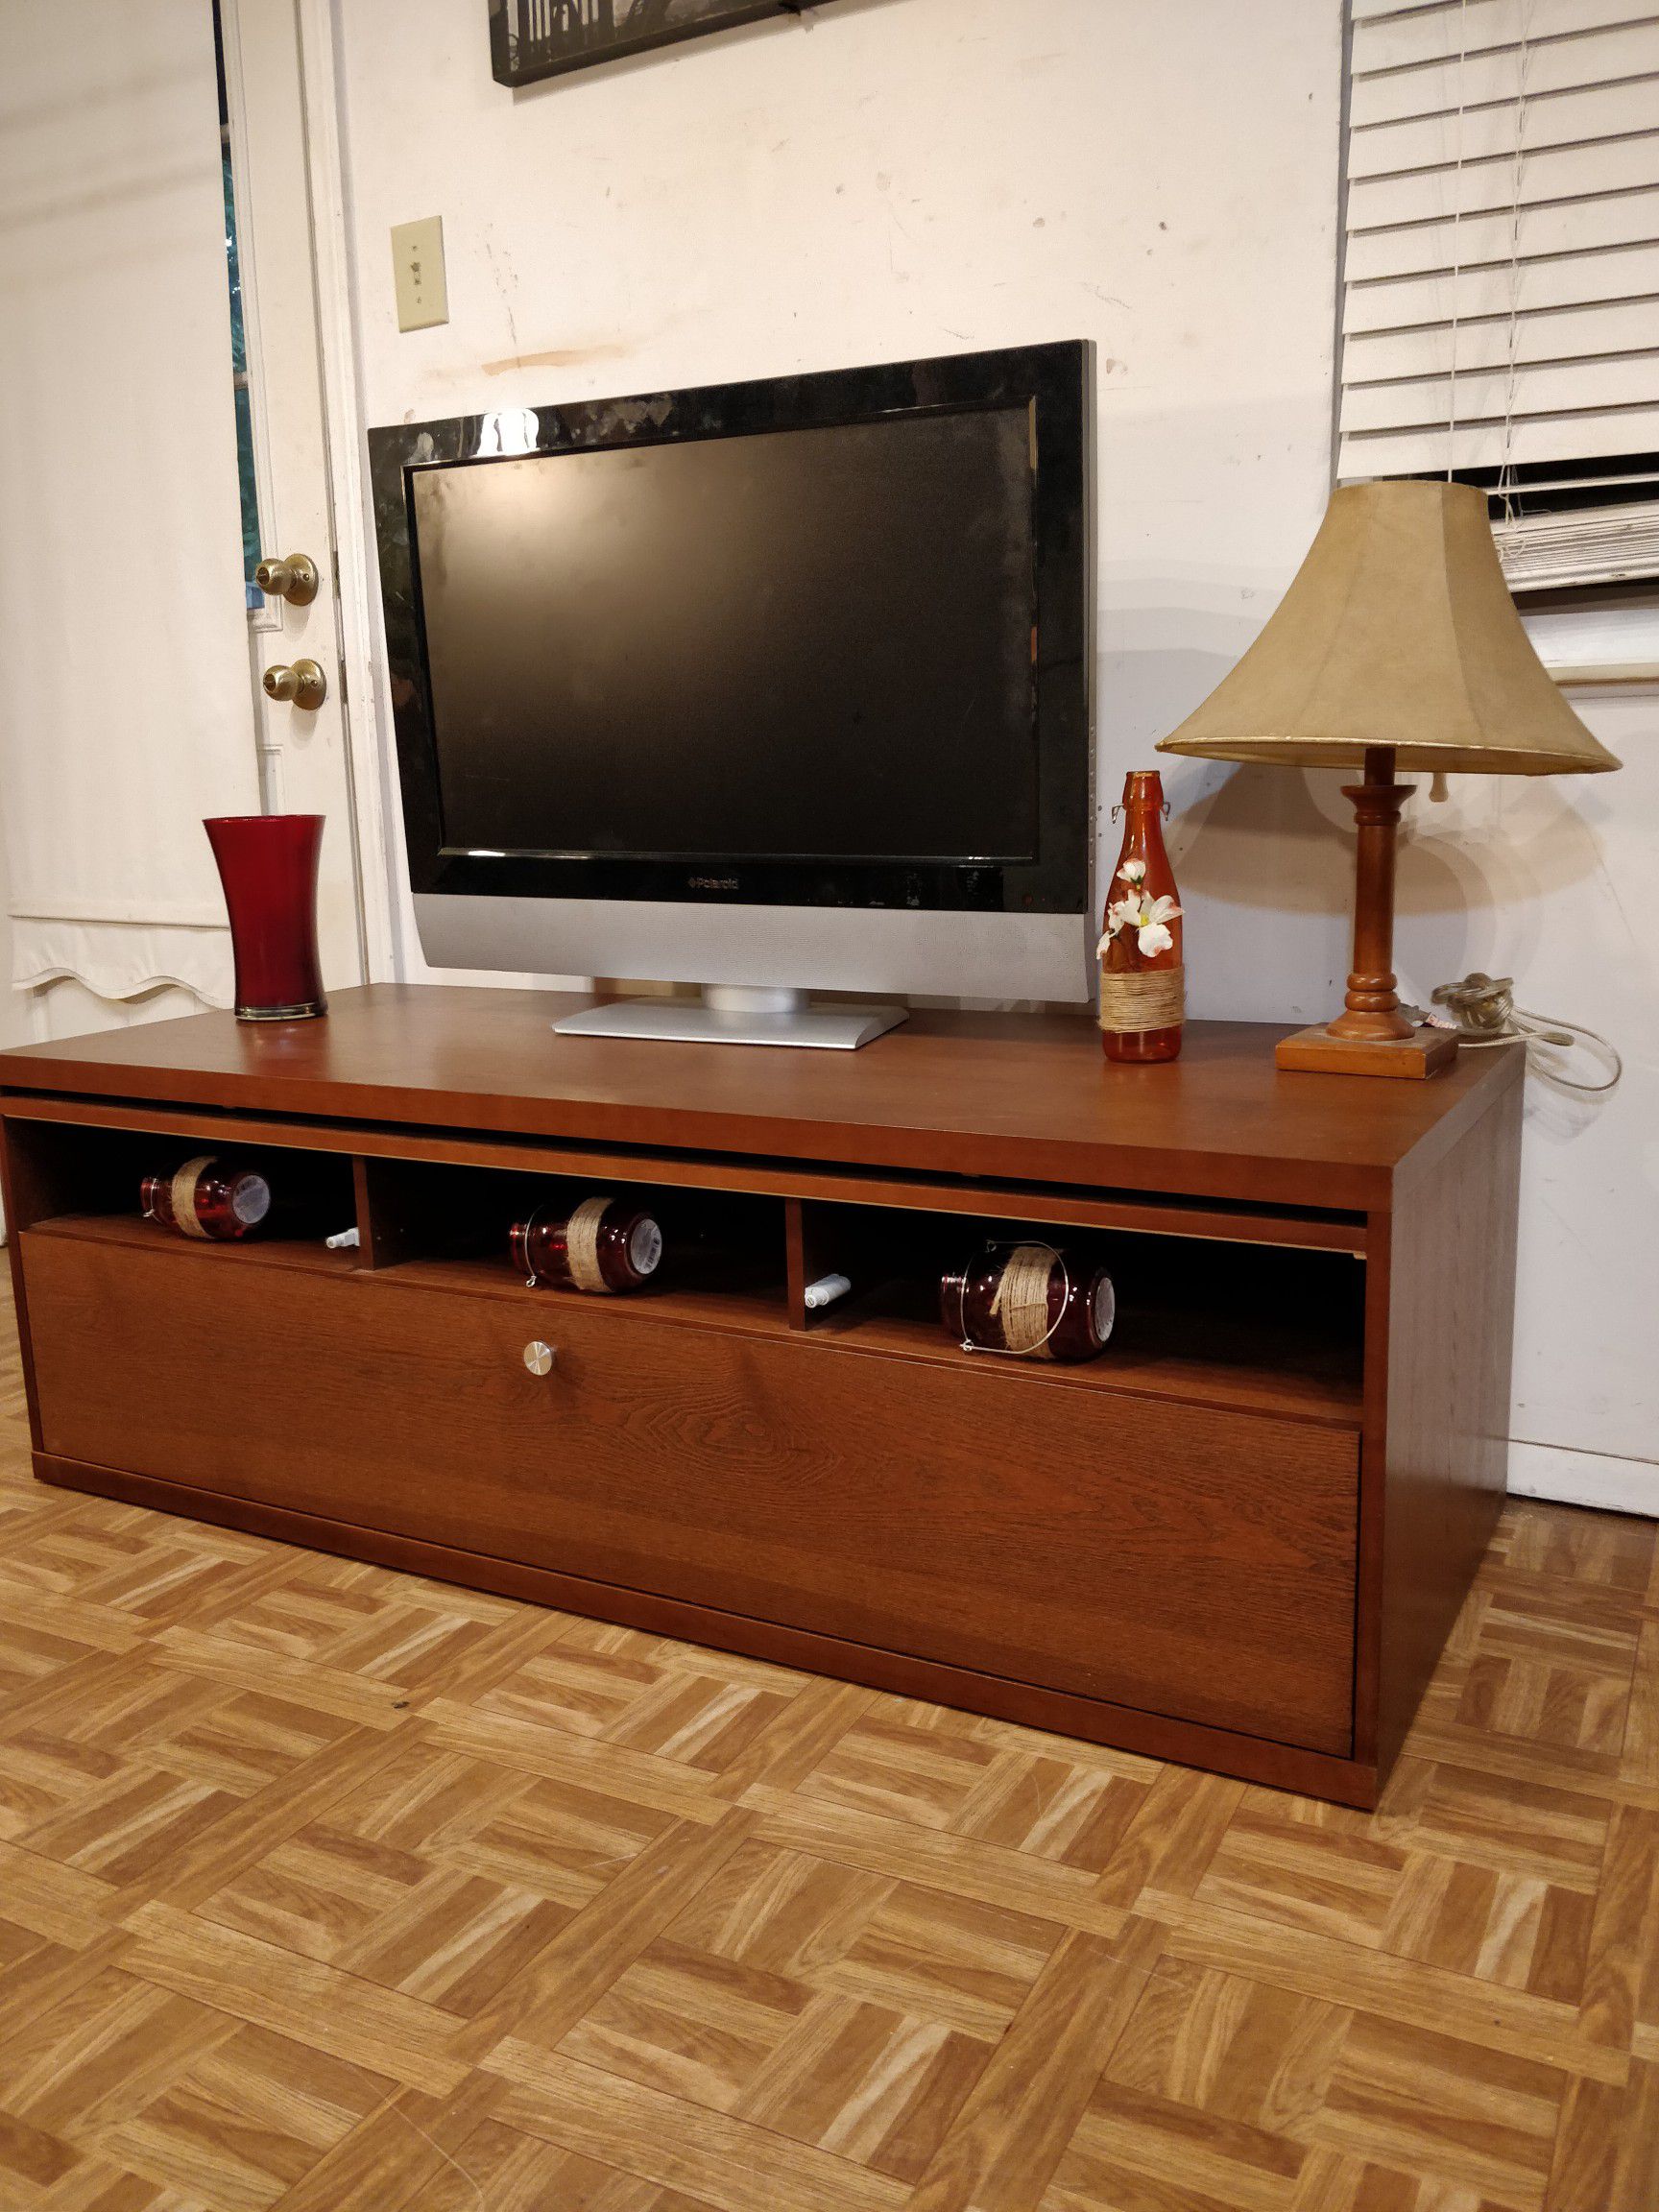 Nice big TV stand with drawers for big TVs in great condition, all drawers working well. L57"*W23"*H19"